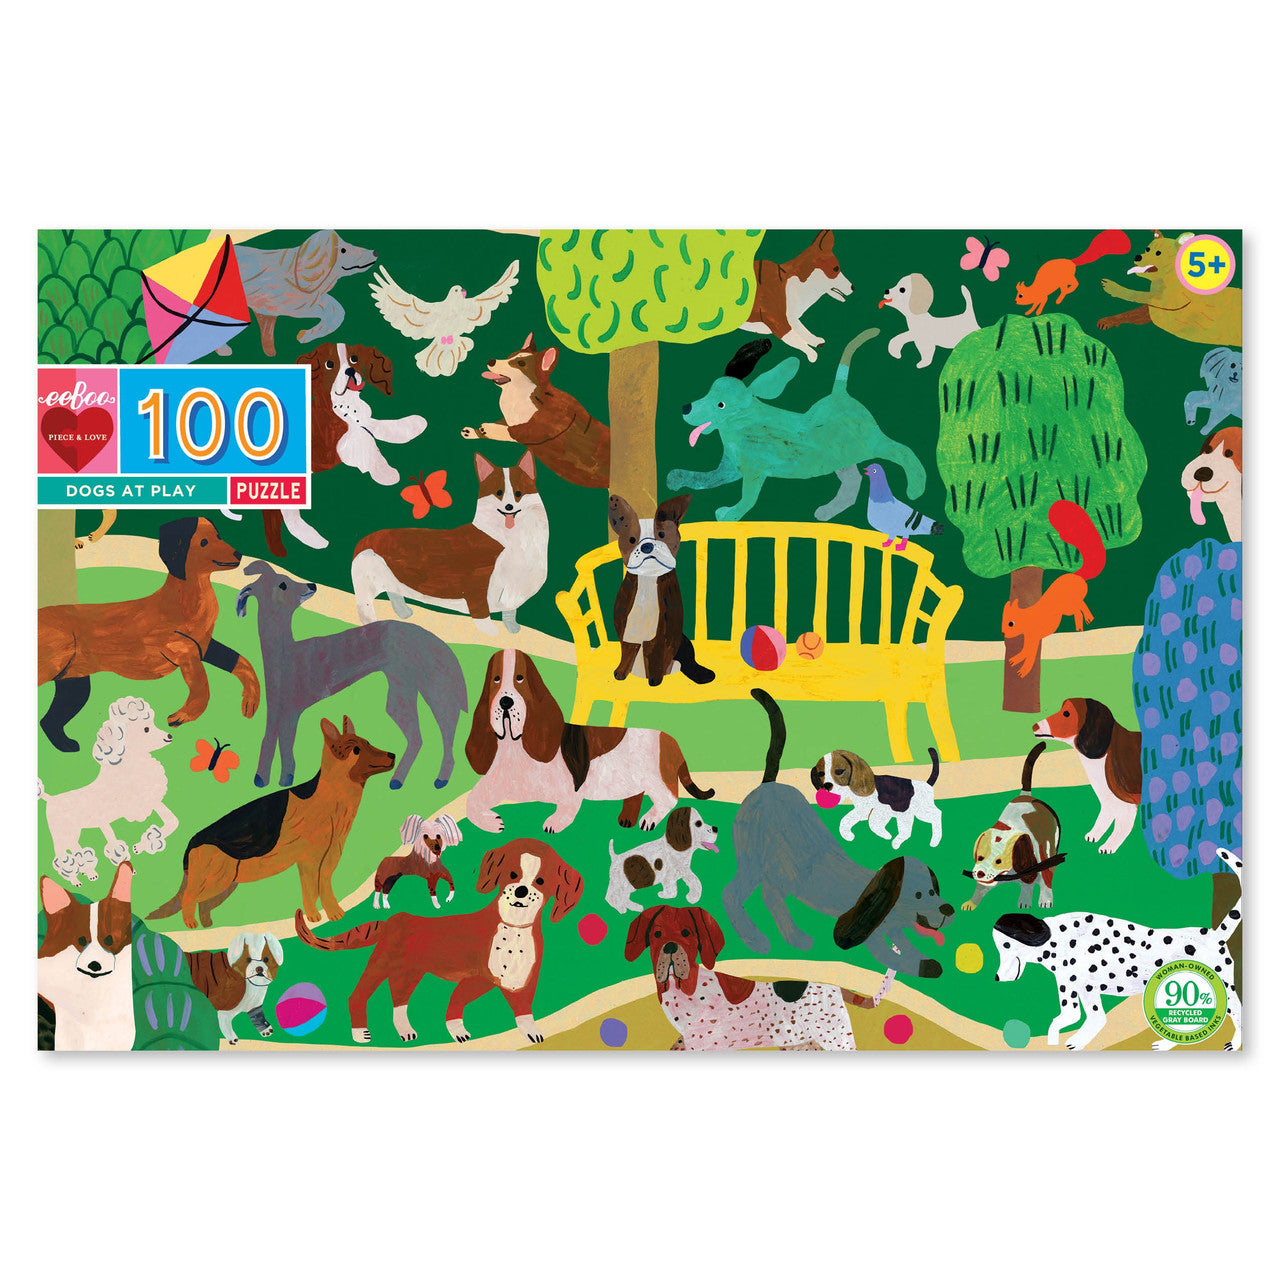 EEBOO - Puzzle - Dogs at Play - 100pc